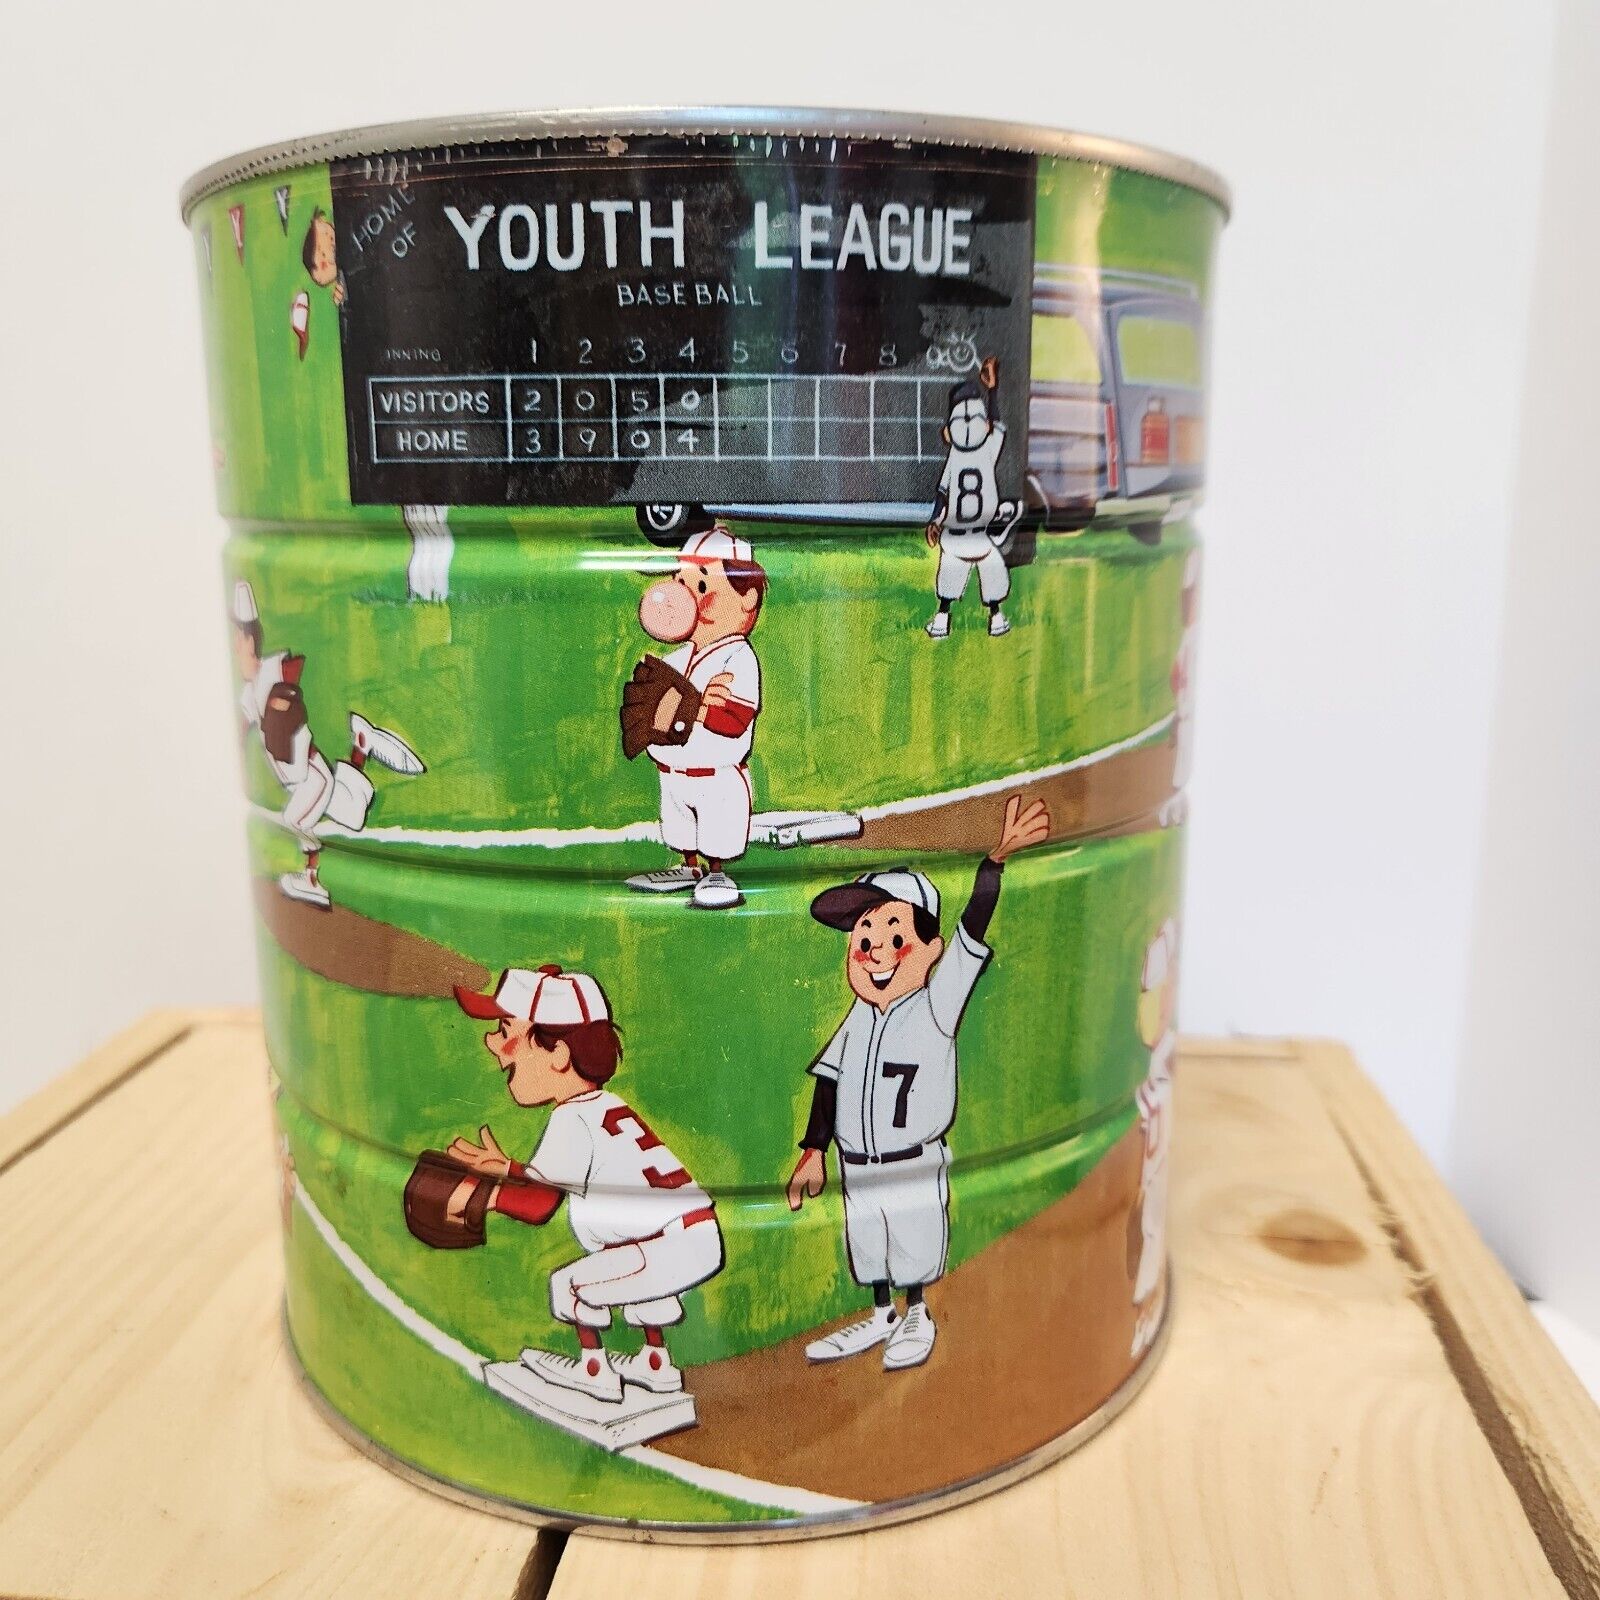 Vintage Butter Nut Metal Advertising Coffee Tin Can with Youth Baseball Graphic